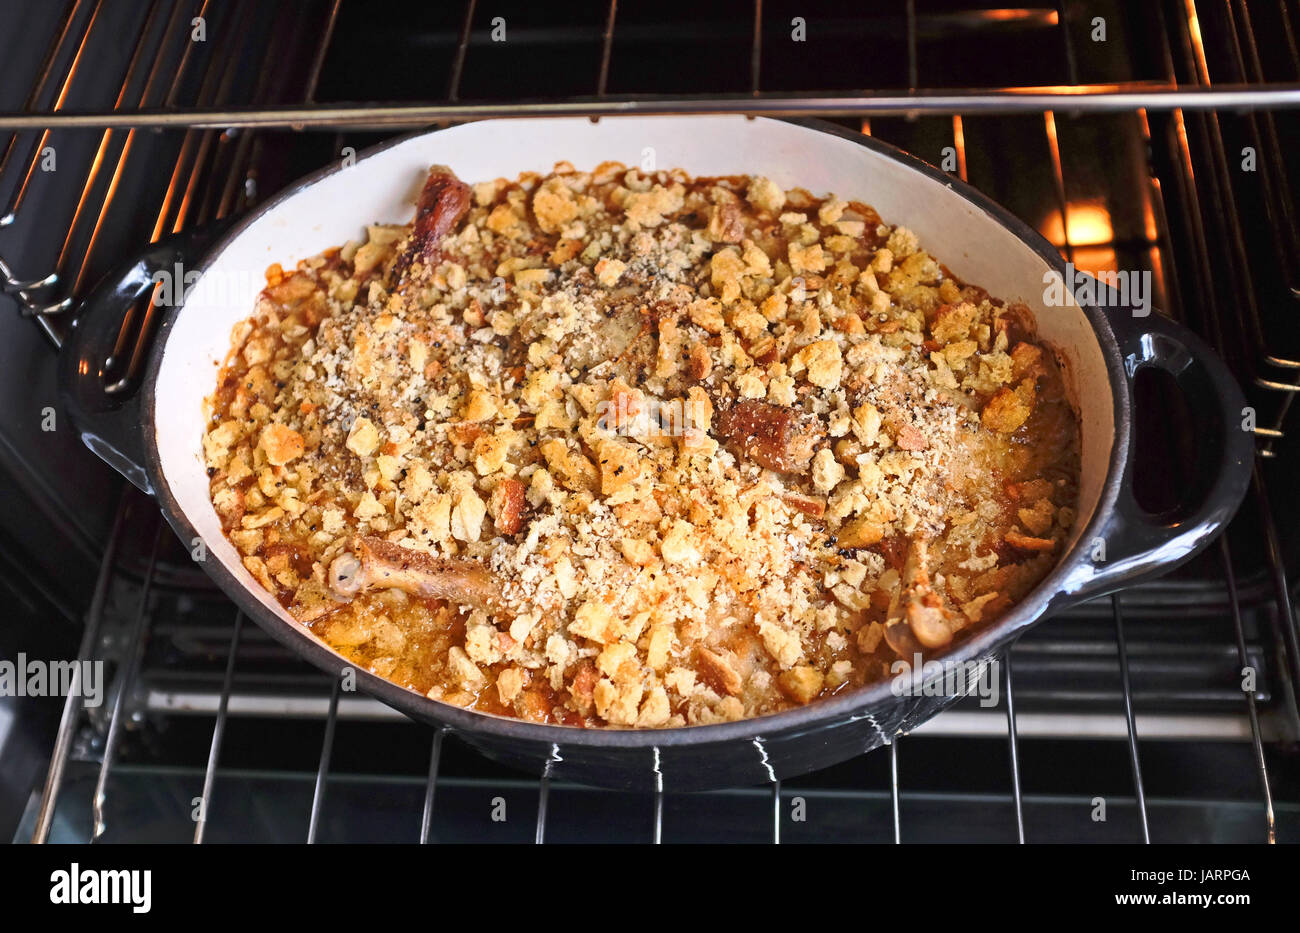 Classic French dish of Cassoulet made with confit duck legs sausages pork belly white beans and breadcrumbs Stock Photo